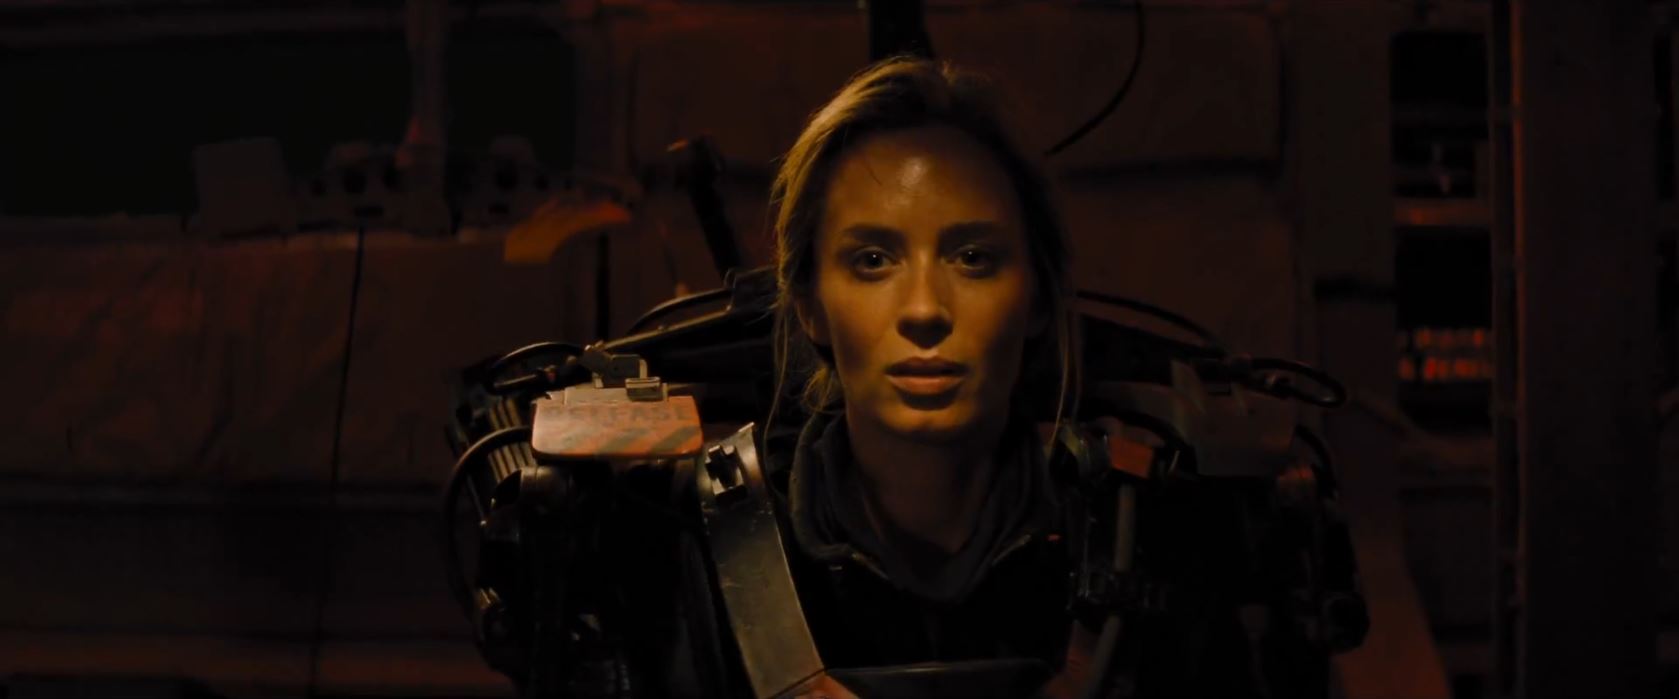 Edge Of Tomorrow starring Tom Cruise - Preview! - SciFiEmpire.net